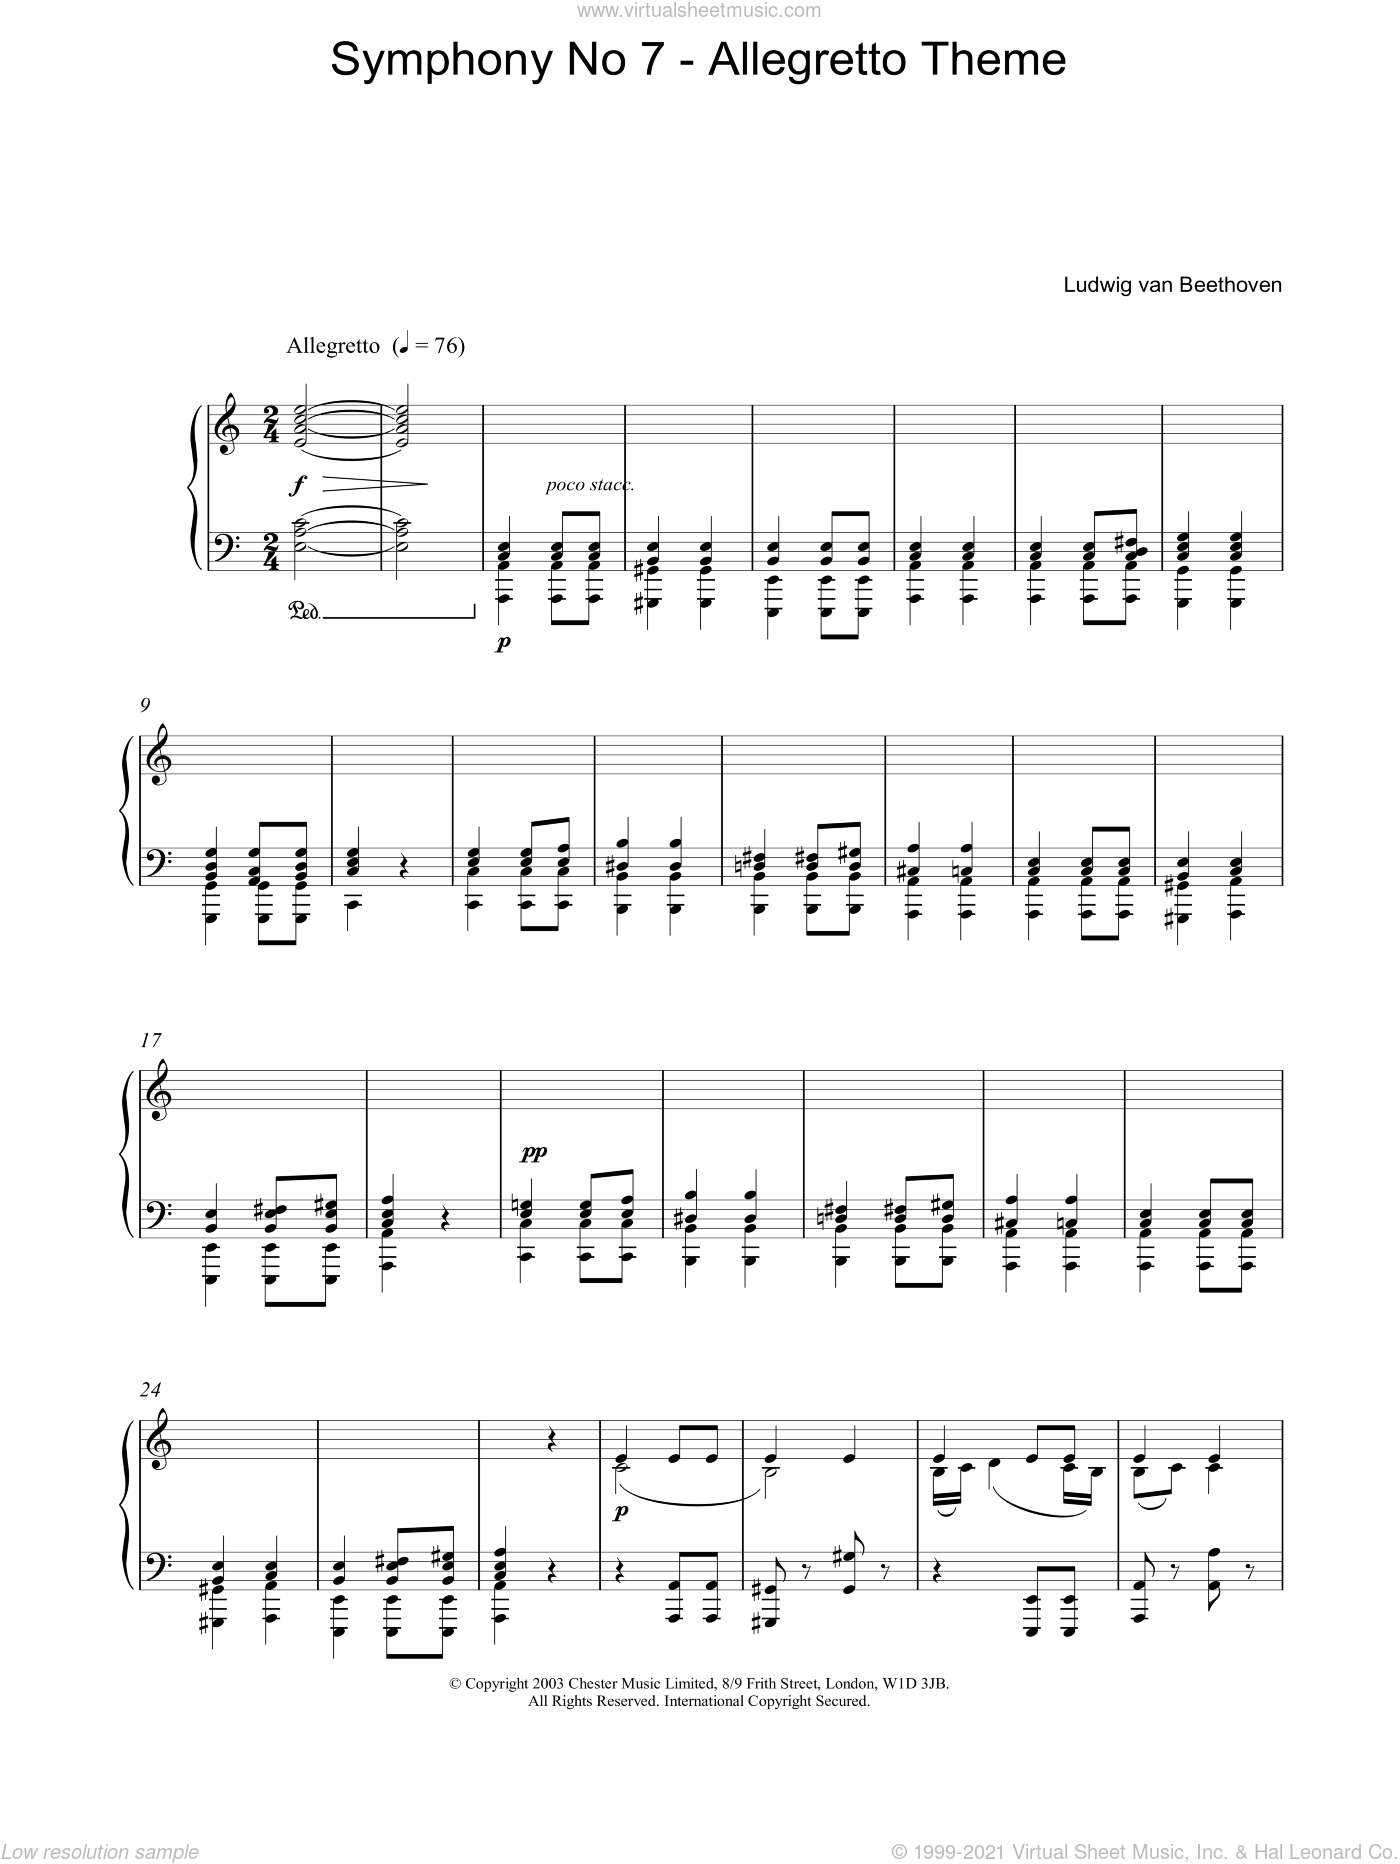 Beethoven - Symphony No. 7 - Allegretto Theme sheet music for piano solo